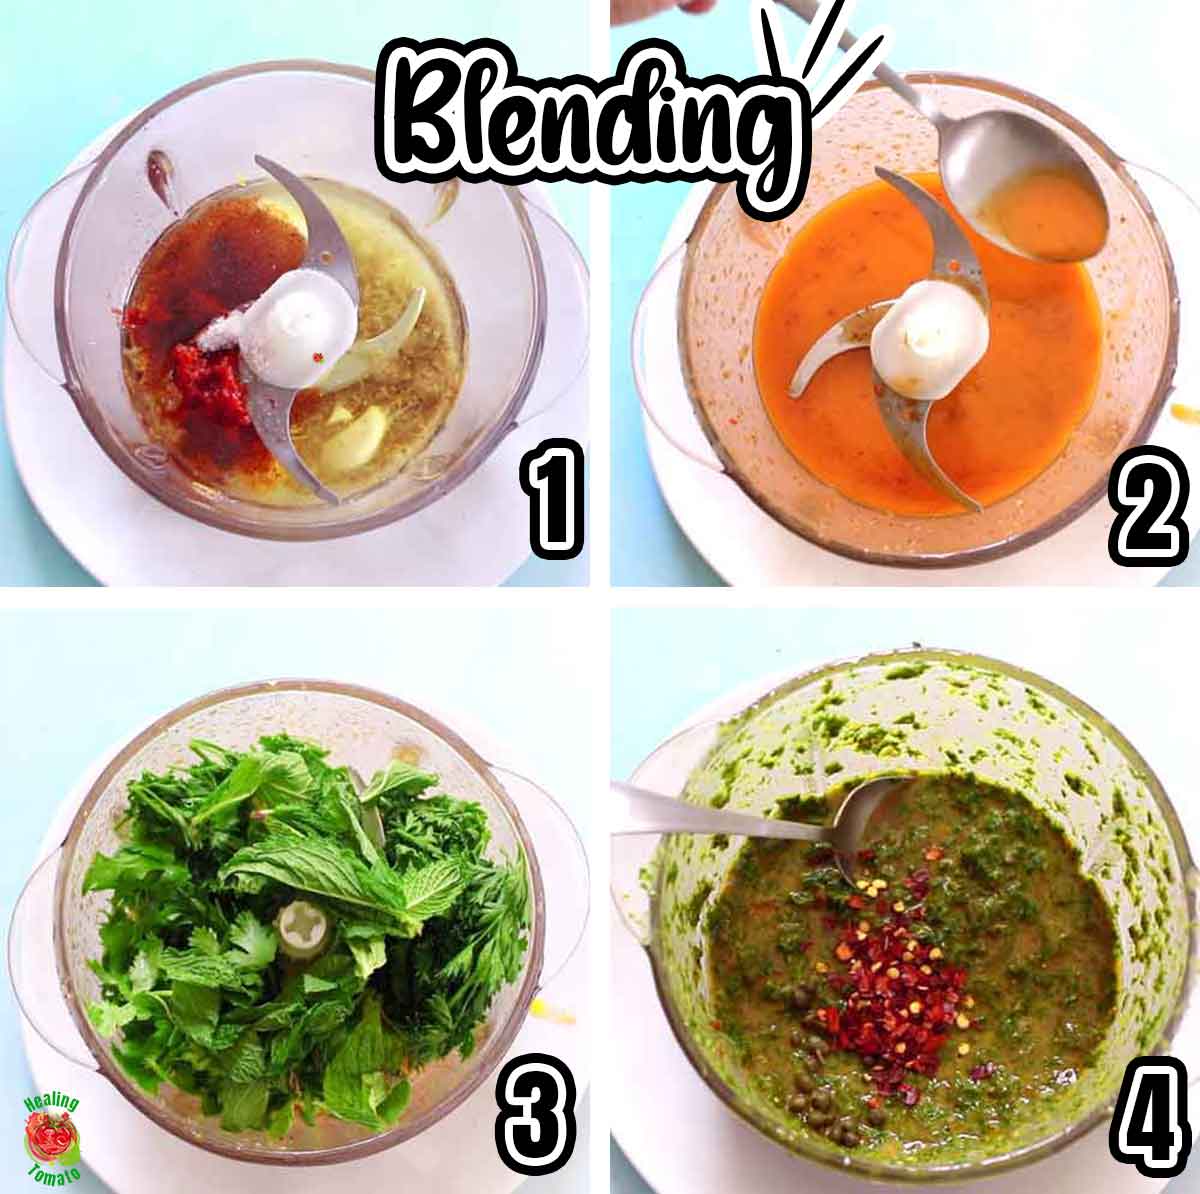 Collage of 4 images that show how to blend the ingredients for chermoula sauce.